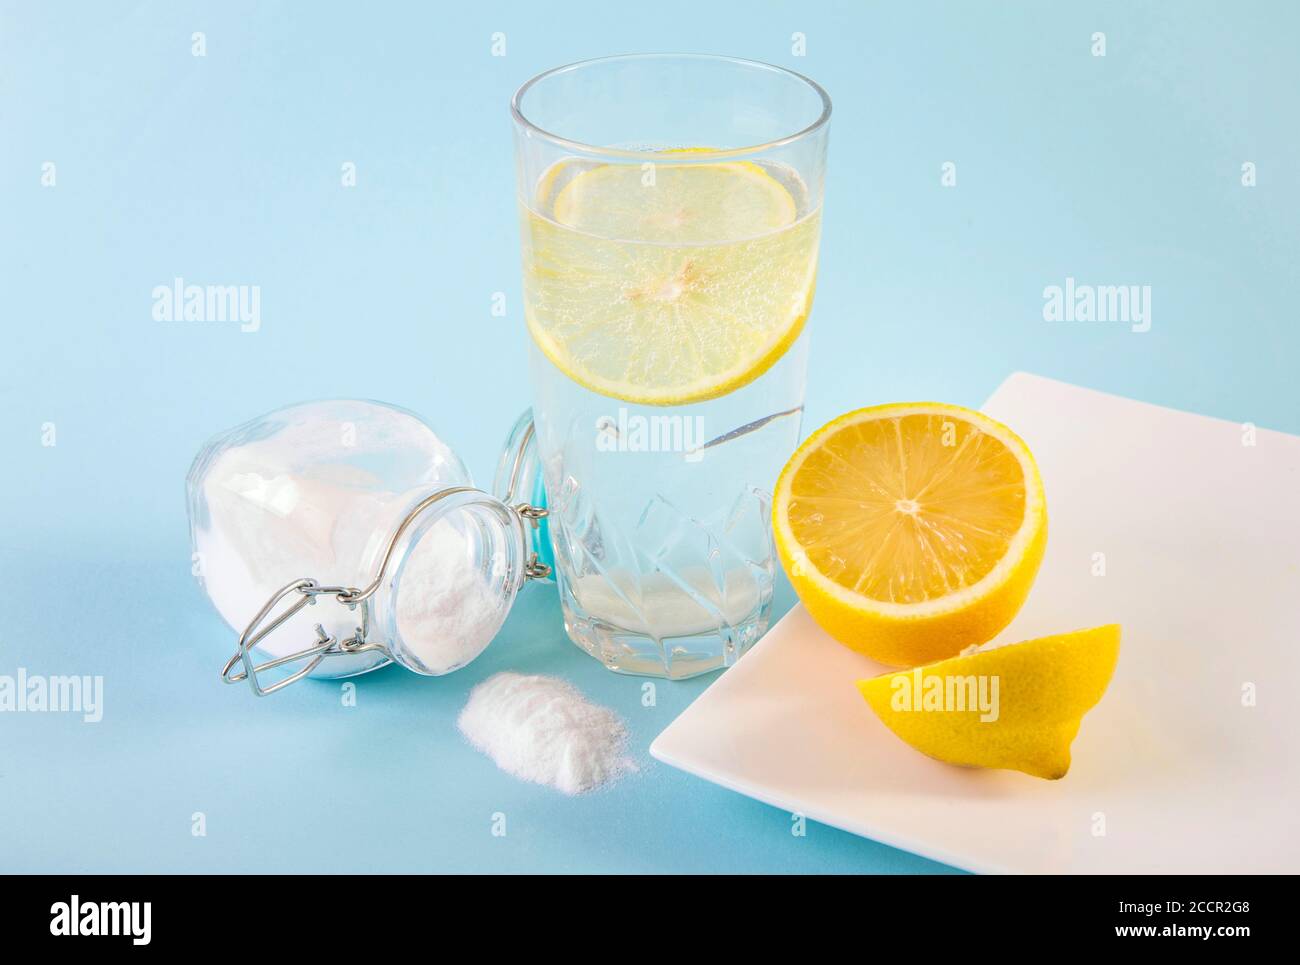 Baking soda in drinking glass with water and lemon juice, health benefits for digestive system concept. Light blue background. Stock Photo